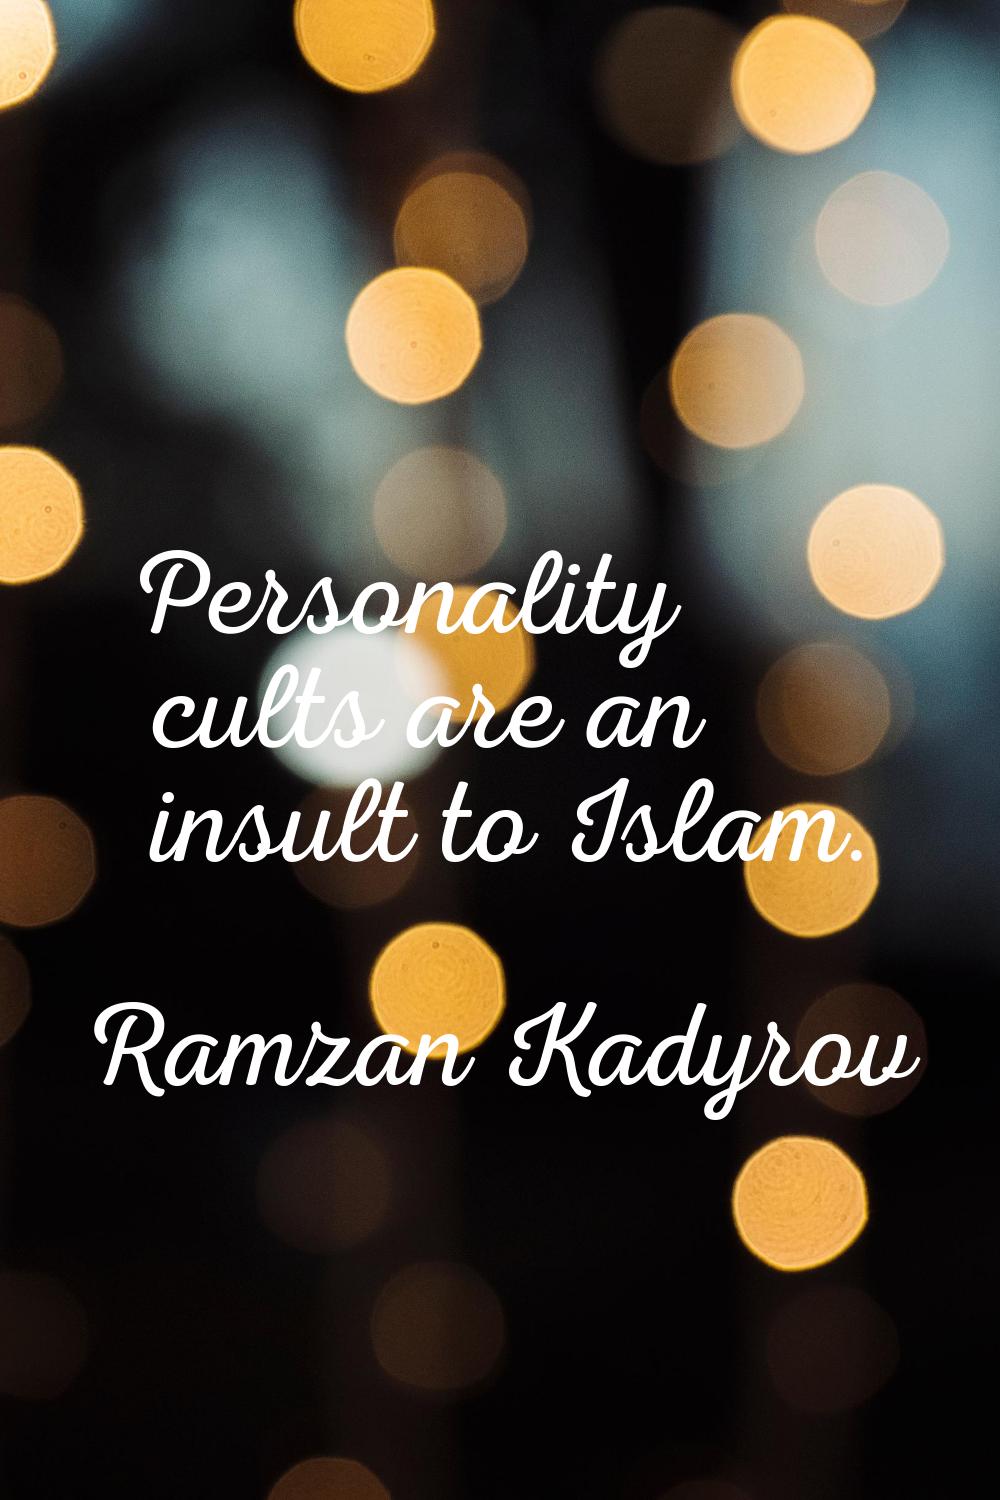 Personality cults are an insult to Islam.